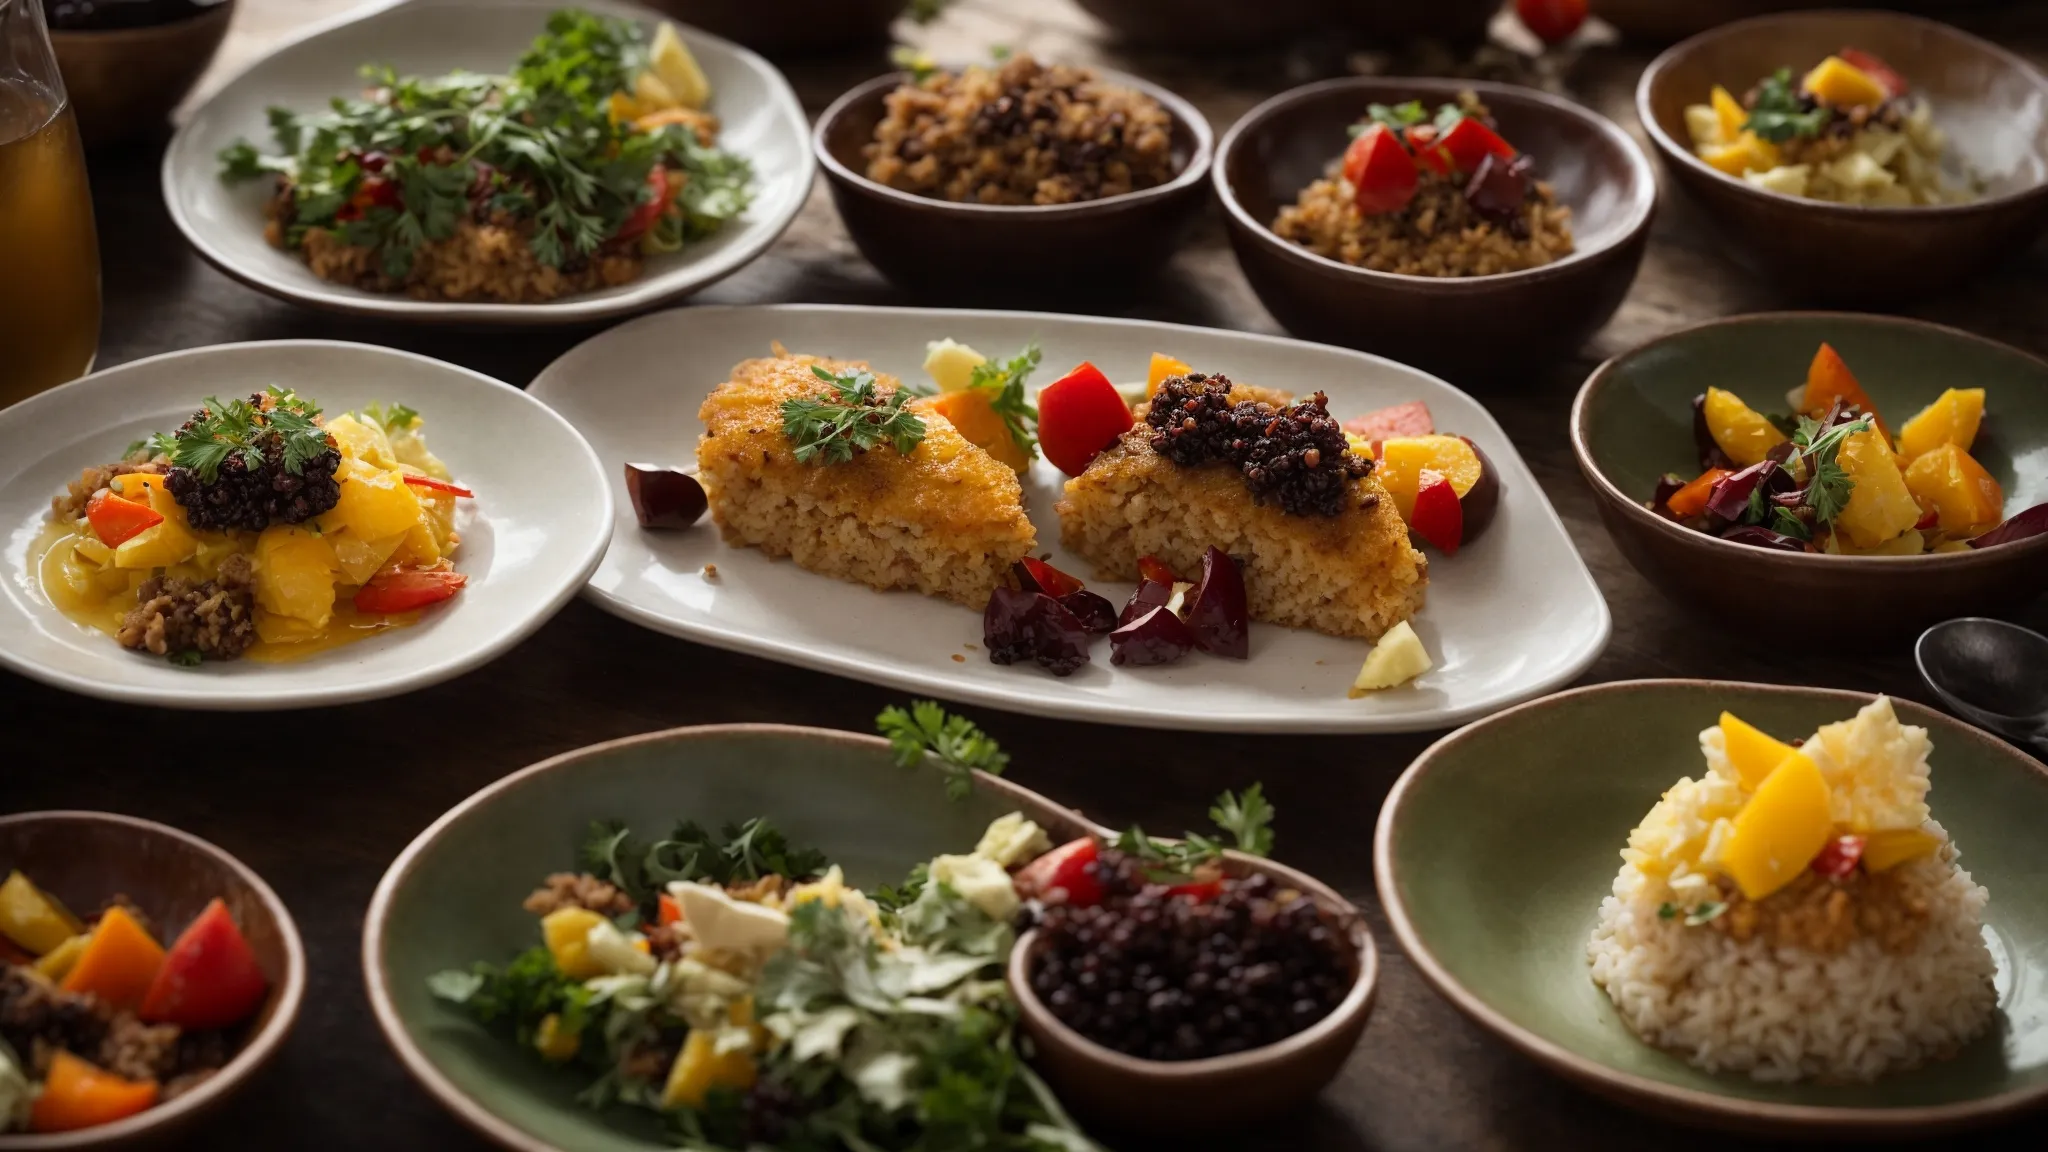 a close-up of a diverse array of colorful, beautifully plated dishes on a rustic wooden table.